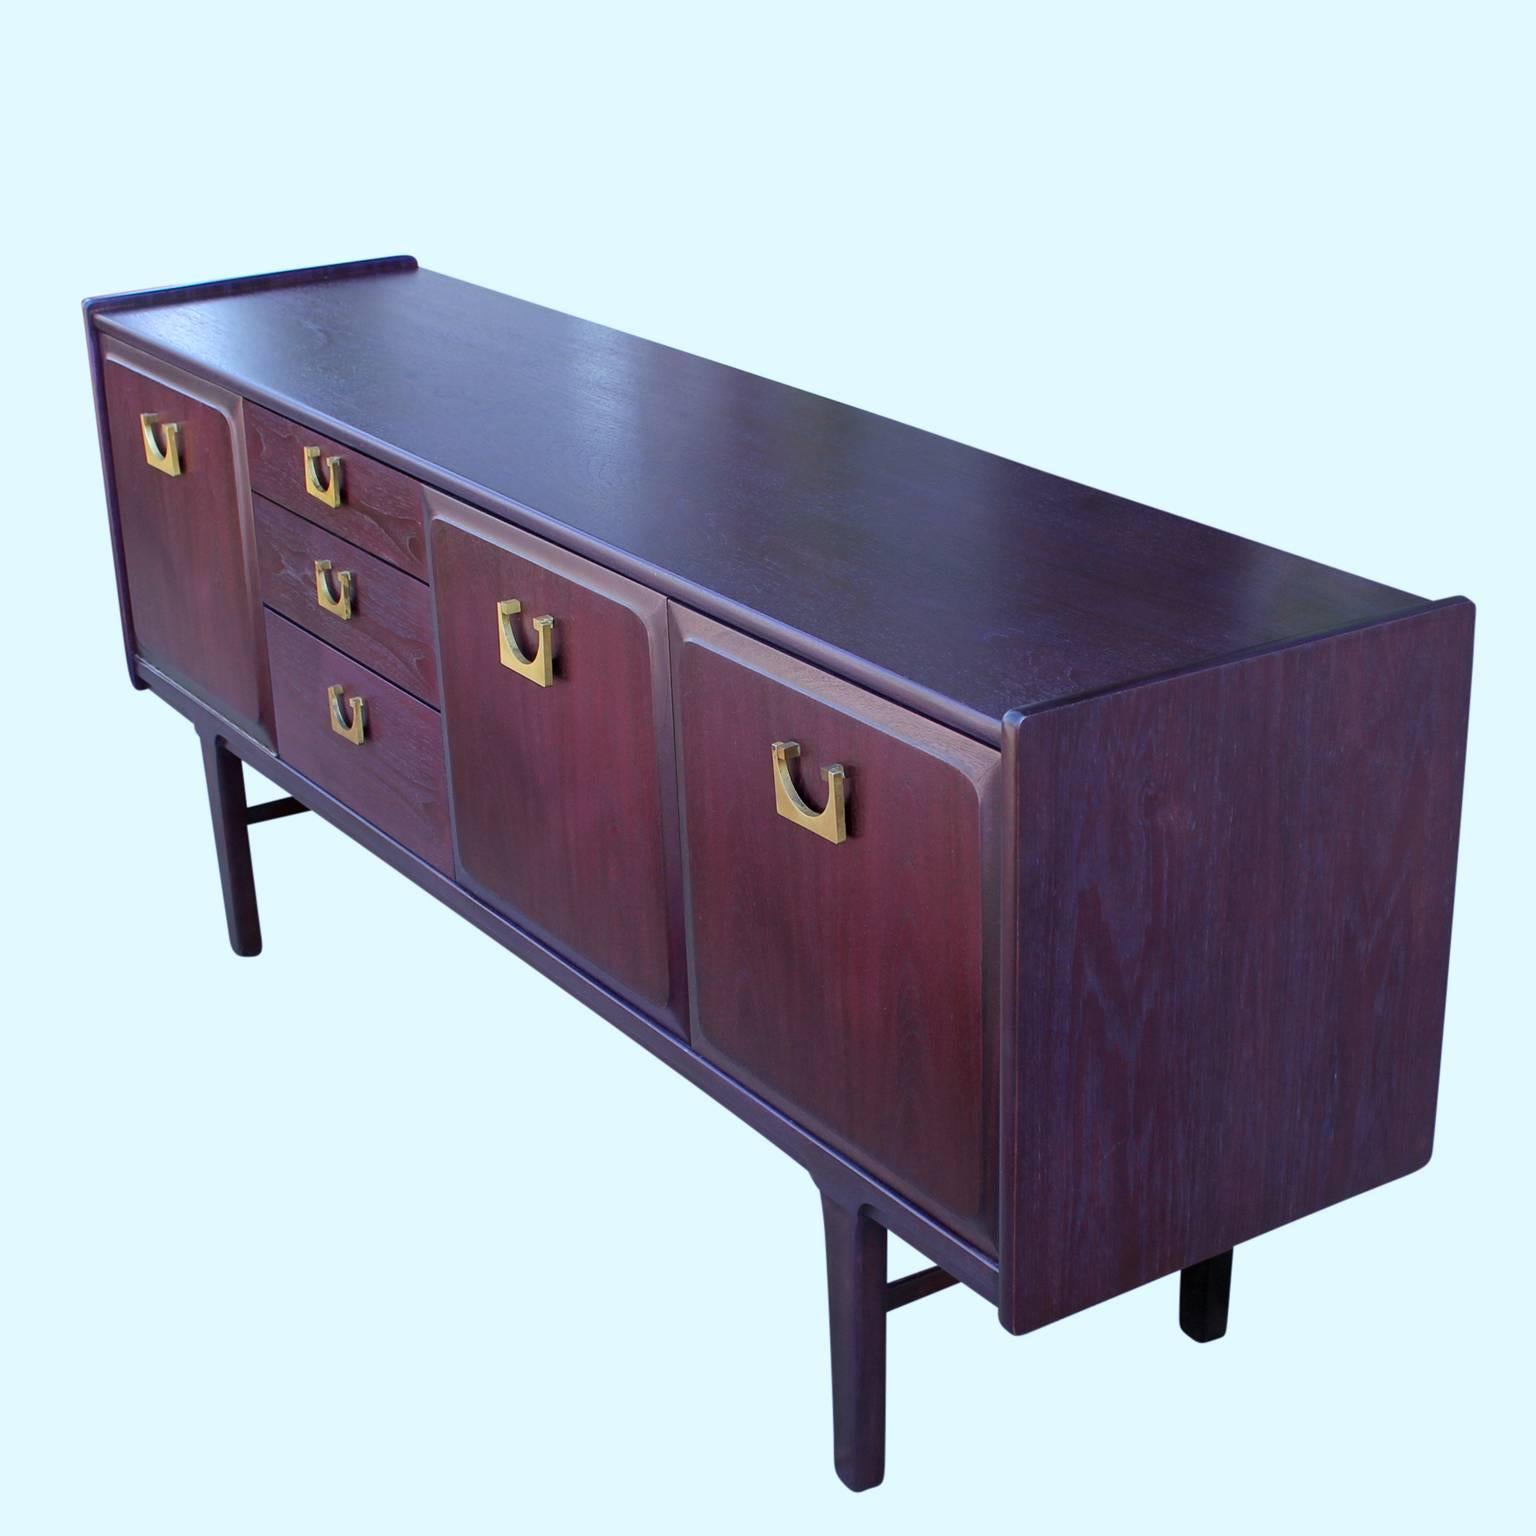 Mid-20th Century Modern Purple Dyed Sideboard / Credenza With Brass Hardware